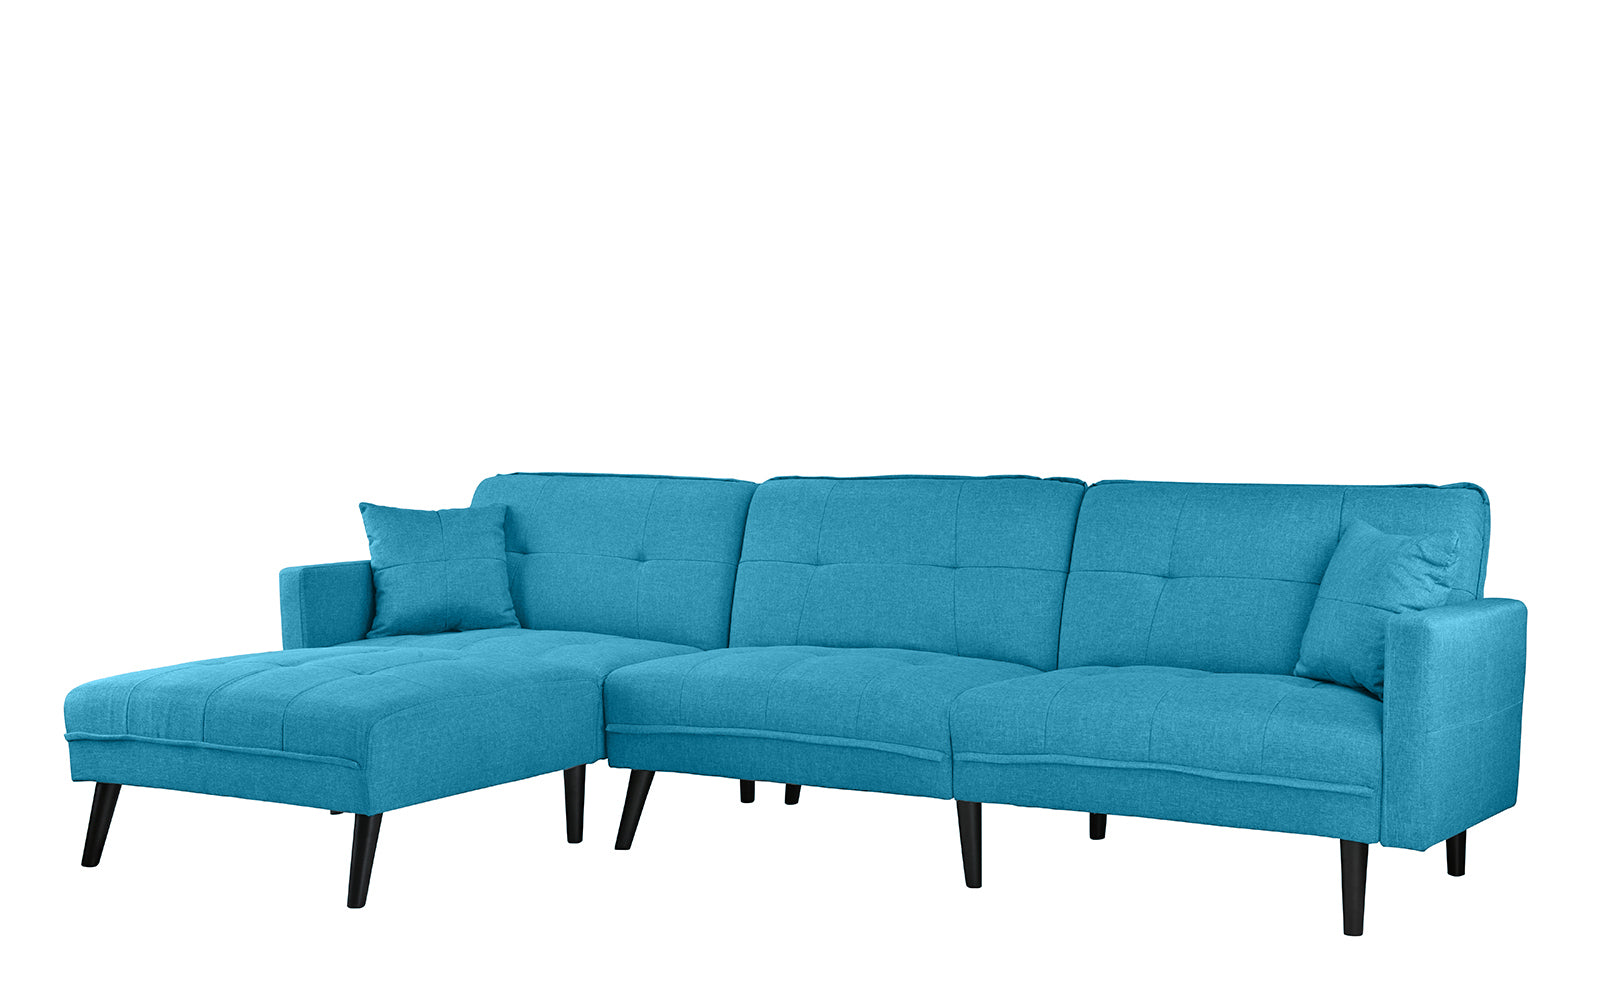 Romulo Mid-Century Modern Linen Sleeper Sectional Sofa with Chaise